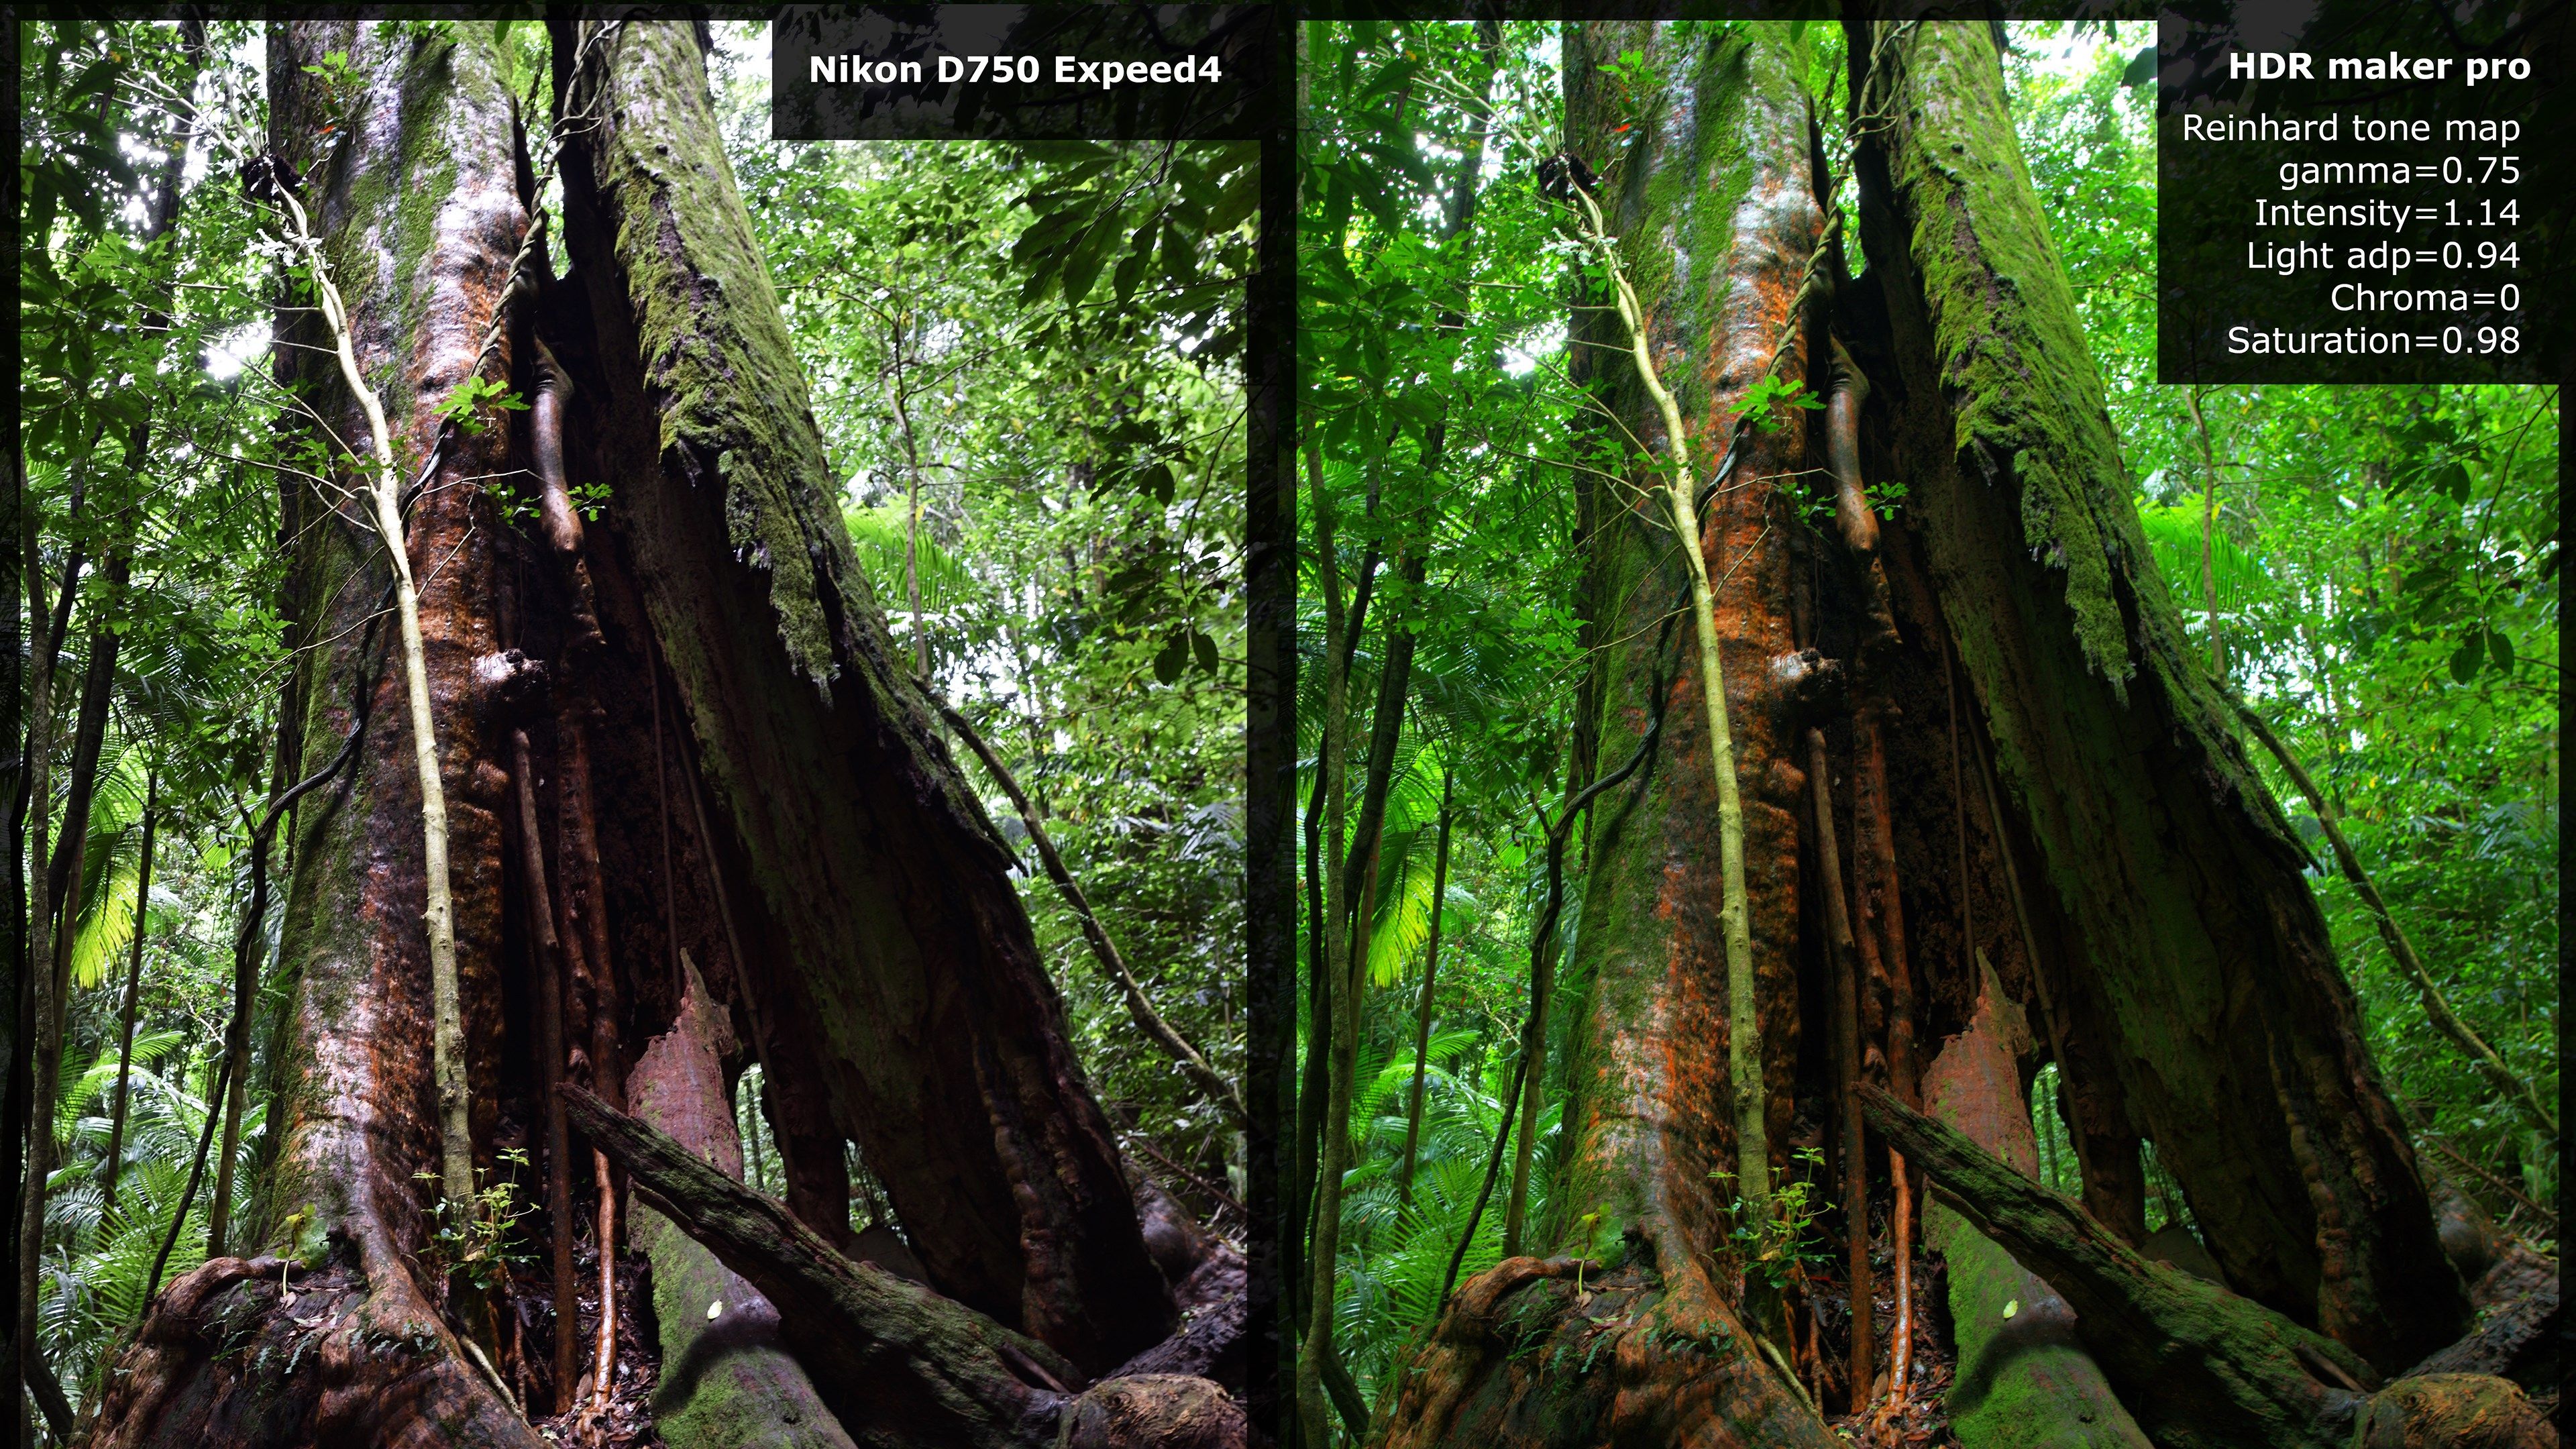 HDR maker pro vs Nikon D750, details in the highlight and shadow are back!